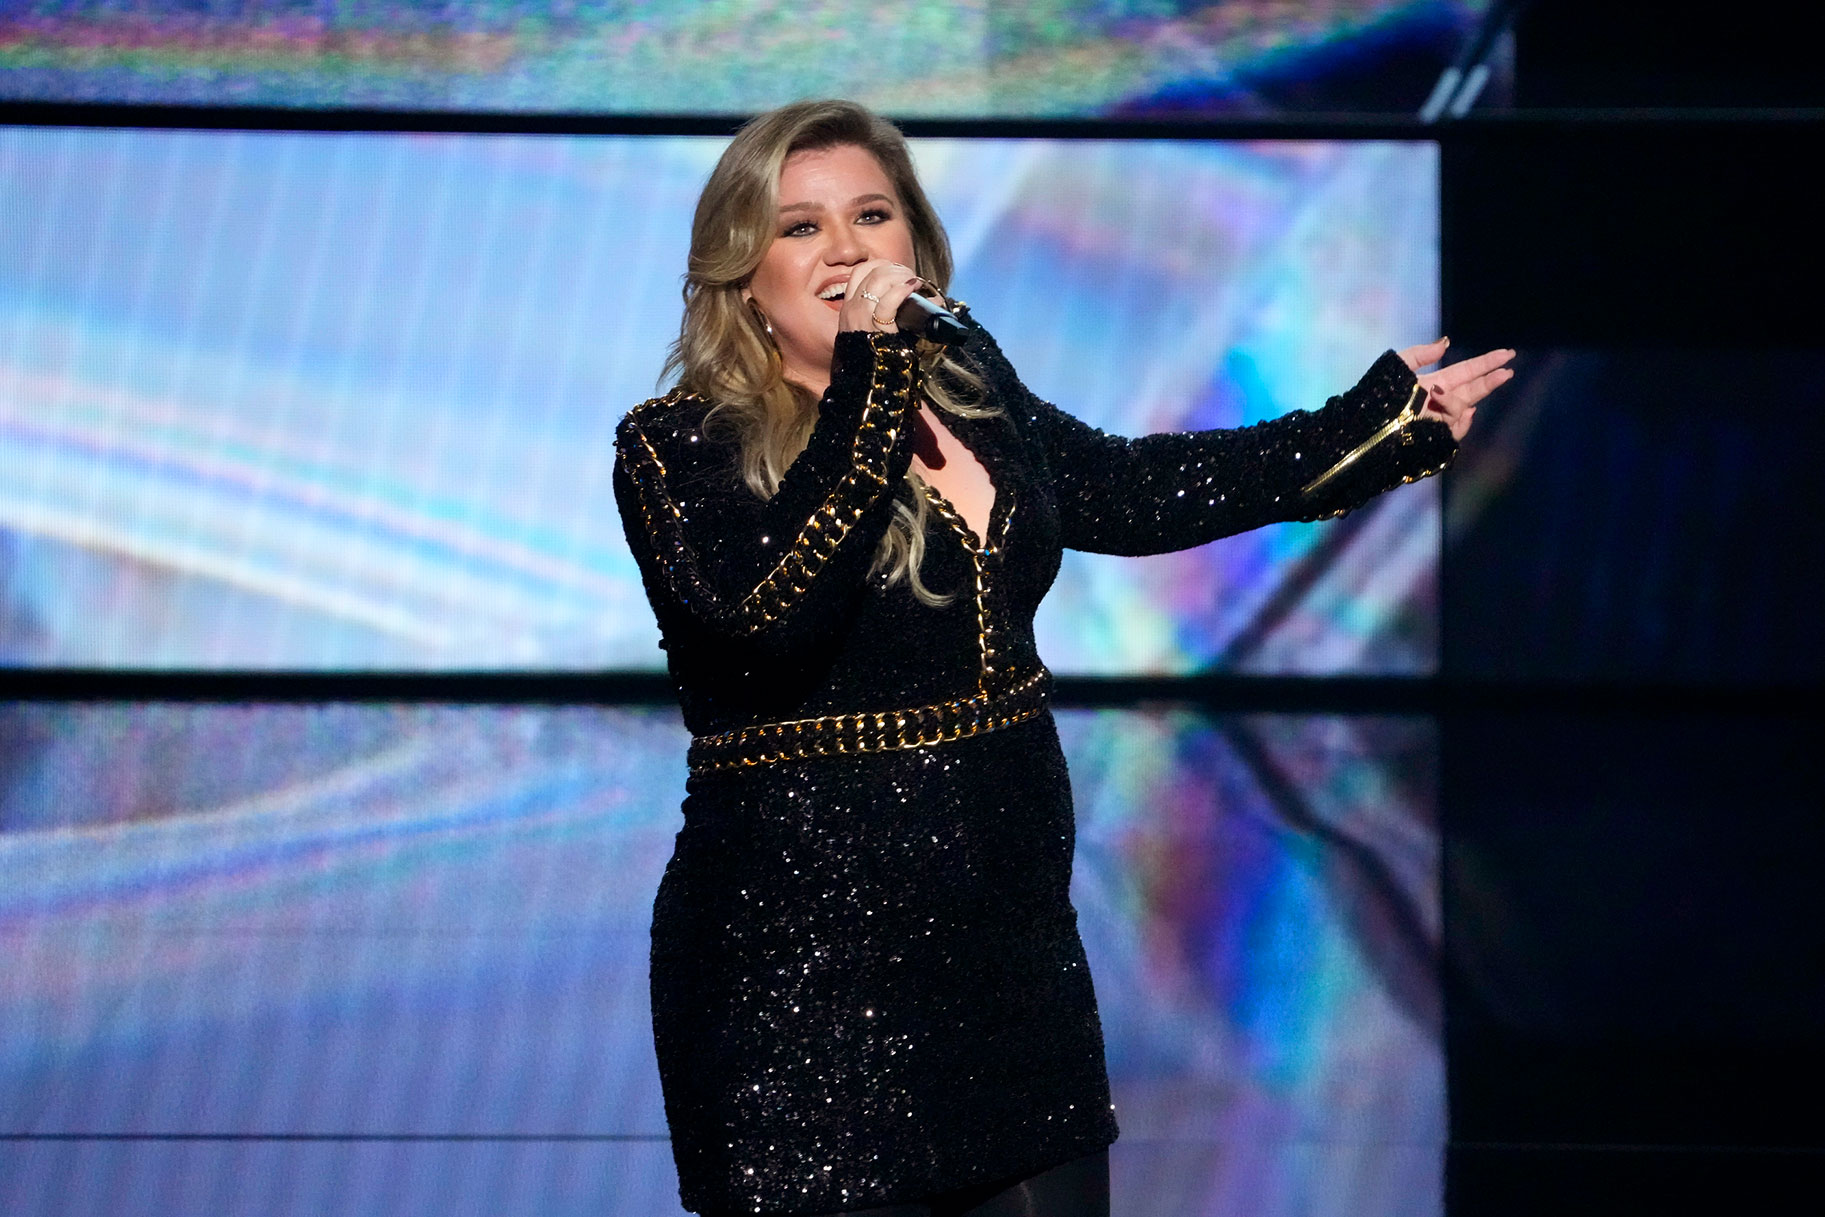 Kelly Clarkson performing onstage in a sparkly black dress